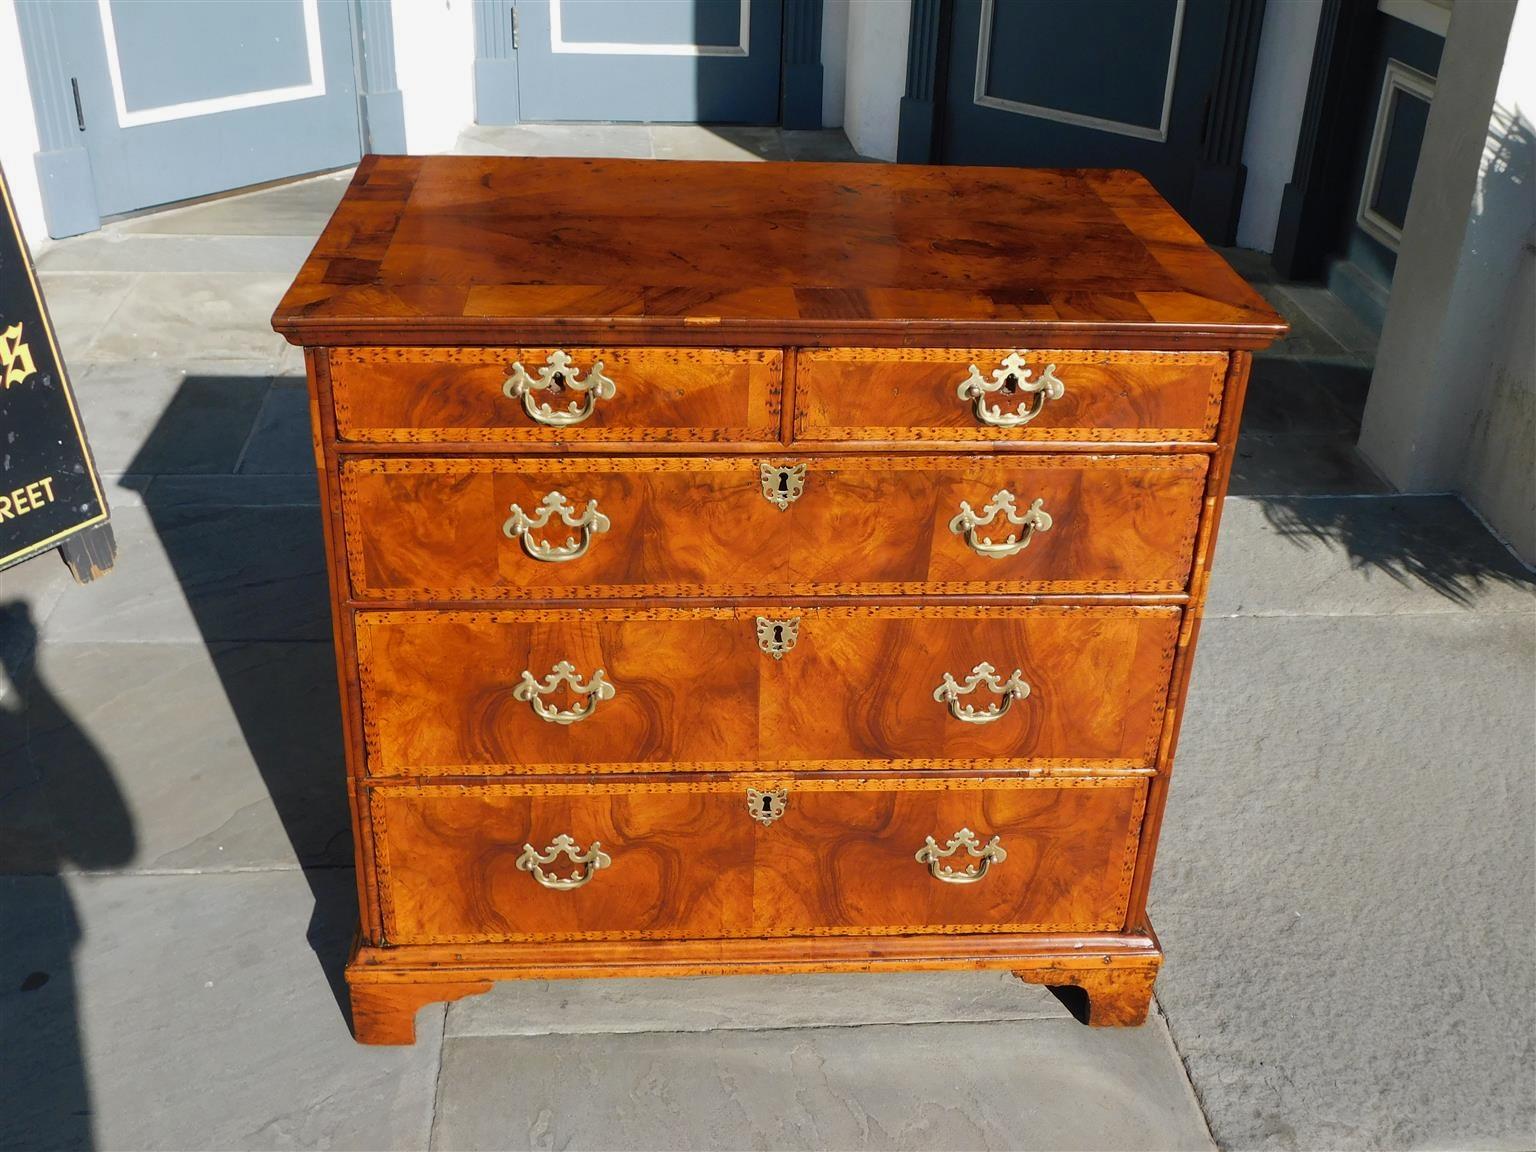 Hand-Carved English Georgian Burl Walnut Satinwood Inlaid Graduated Chest of Drawers C 1750 For Sale